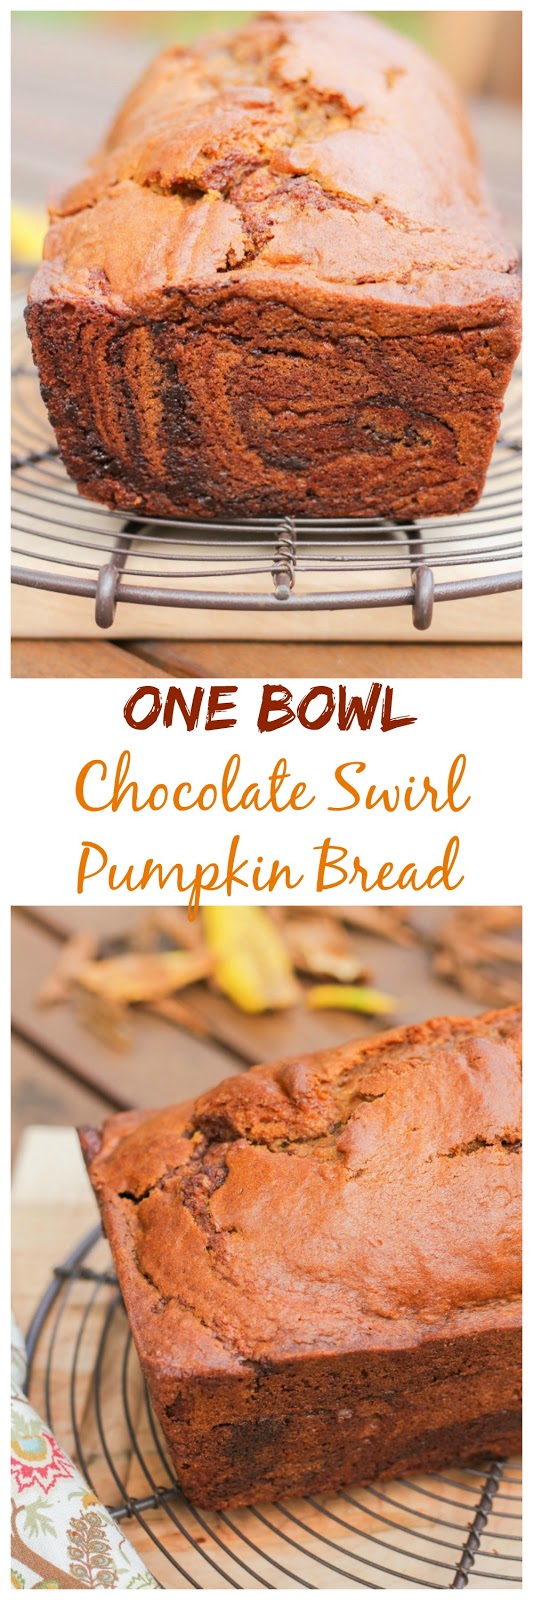 This easy recipe for One Bowl Chocolate Swirl Pumpkin Bread is filled with warm Fall spices and pumpkin flavor, plus a surprise swirl of milk chocolate!